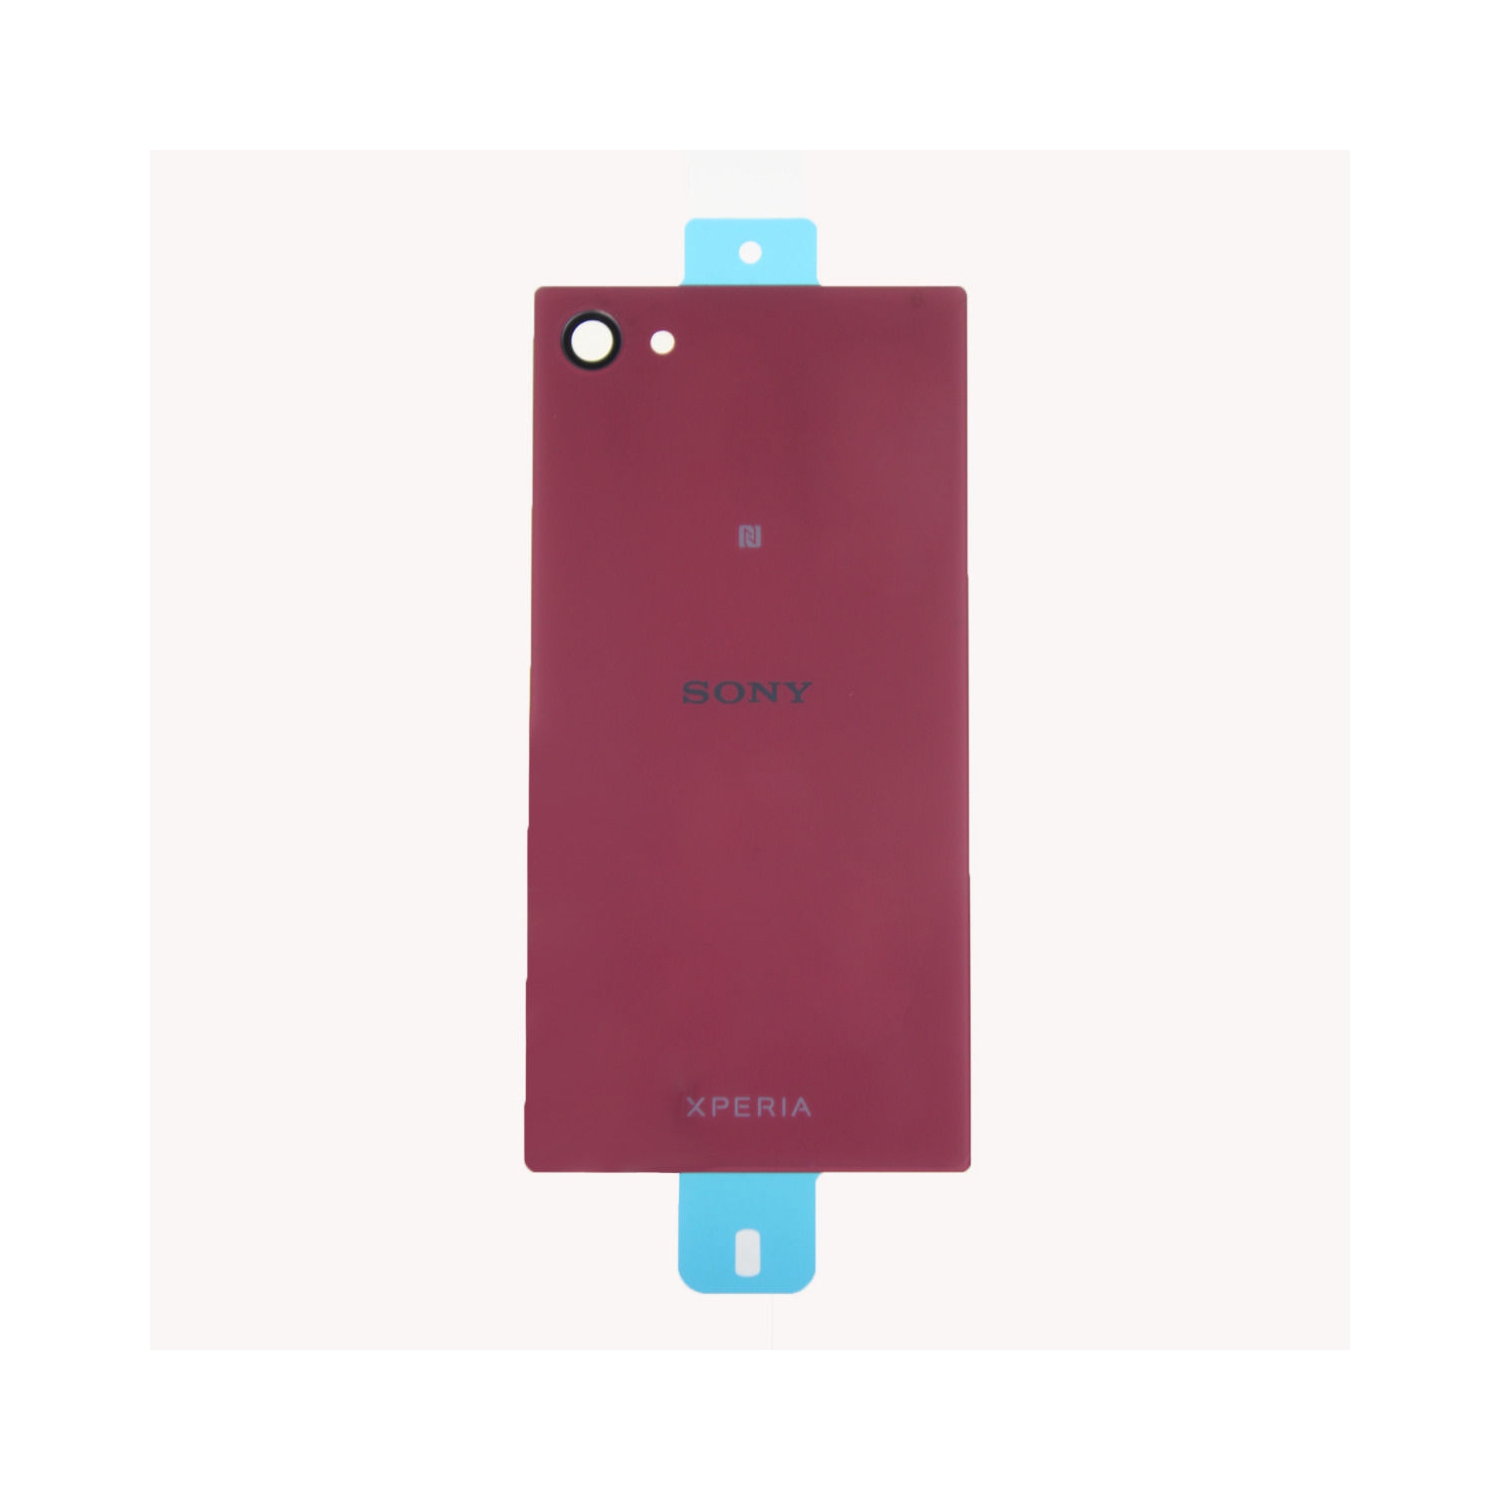 Sony Xperia Z5 Compact Mini E5803 Battery Back Cover Case Door Glass Panel - Red